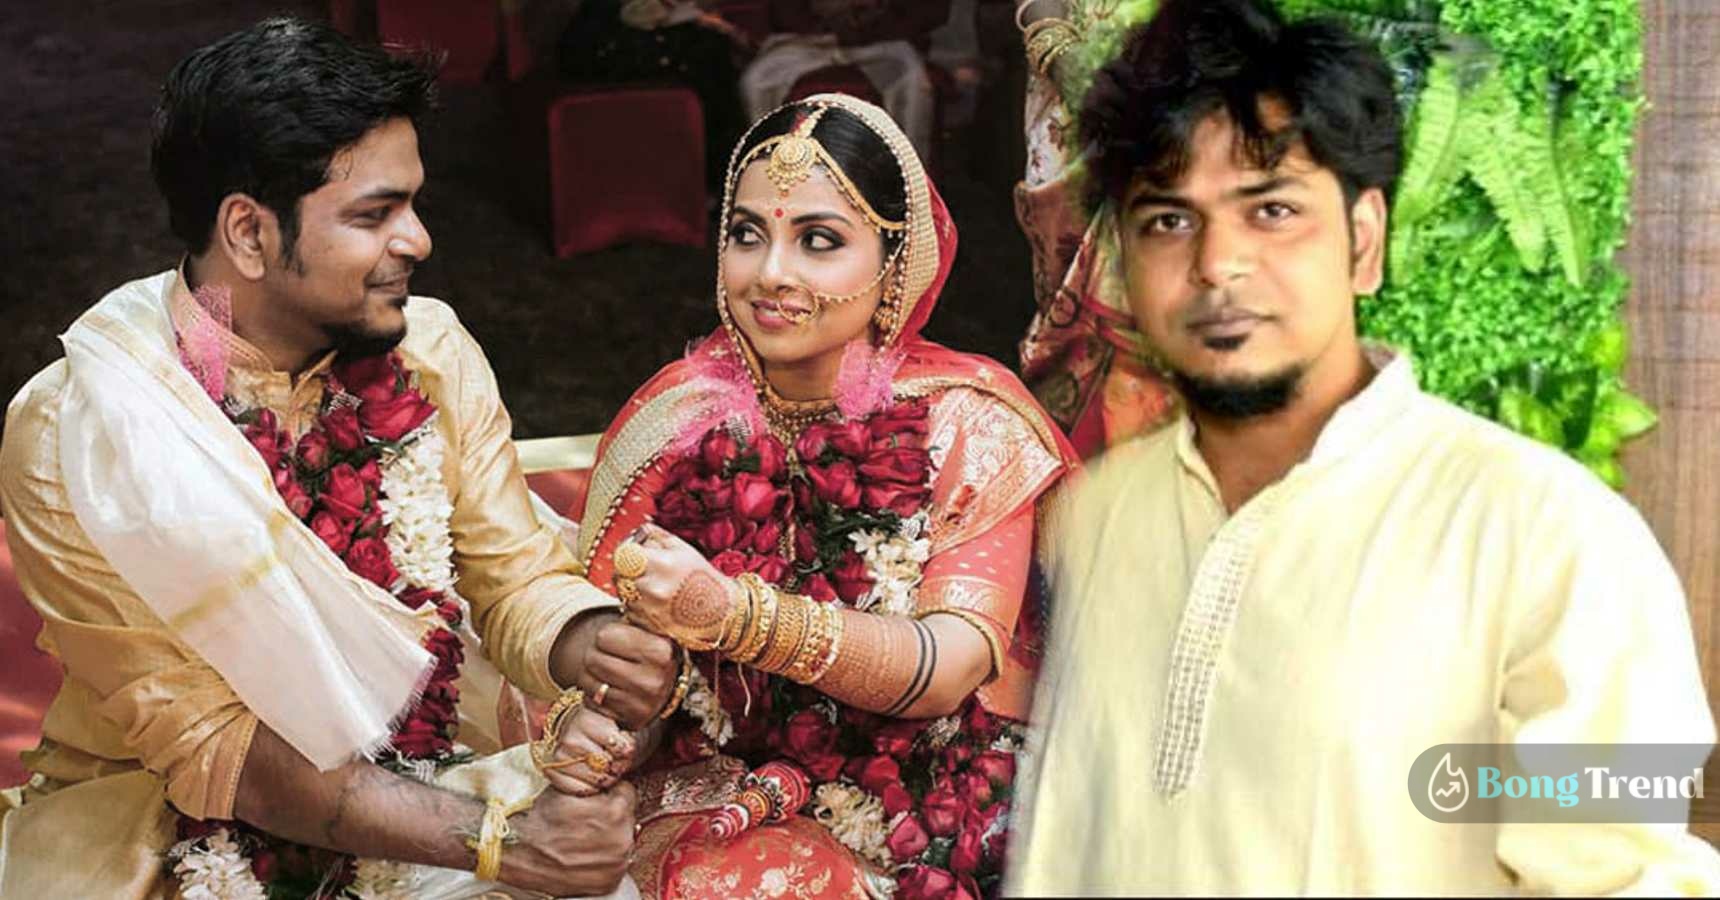 Famous Singer Durnibar Saha going to be married Second time with Oindrila Sen